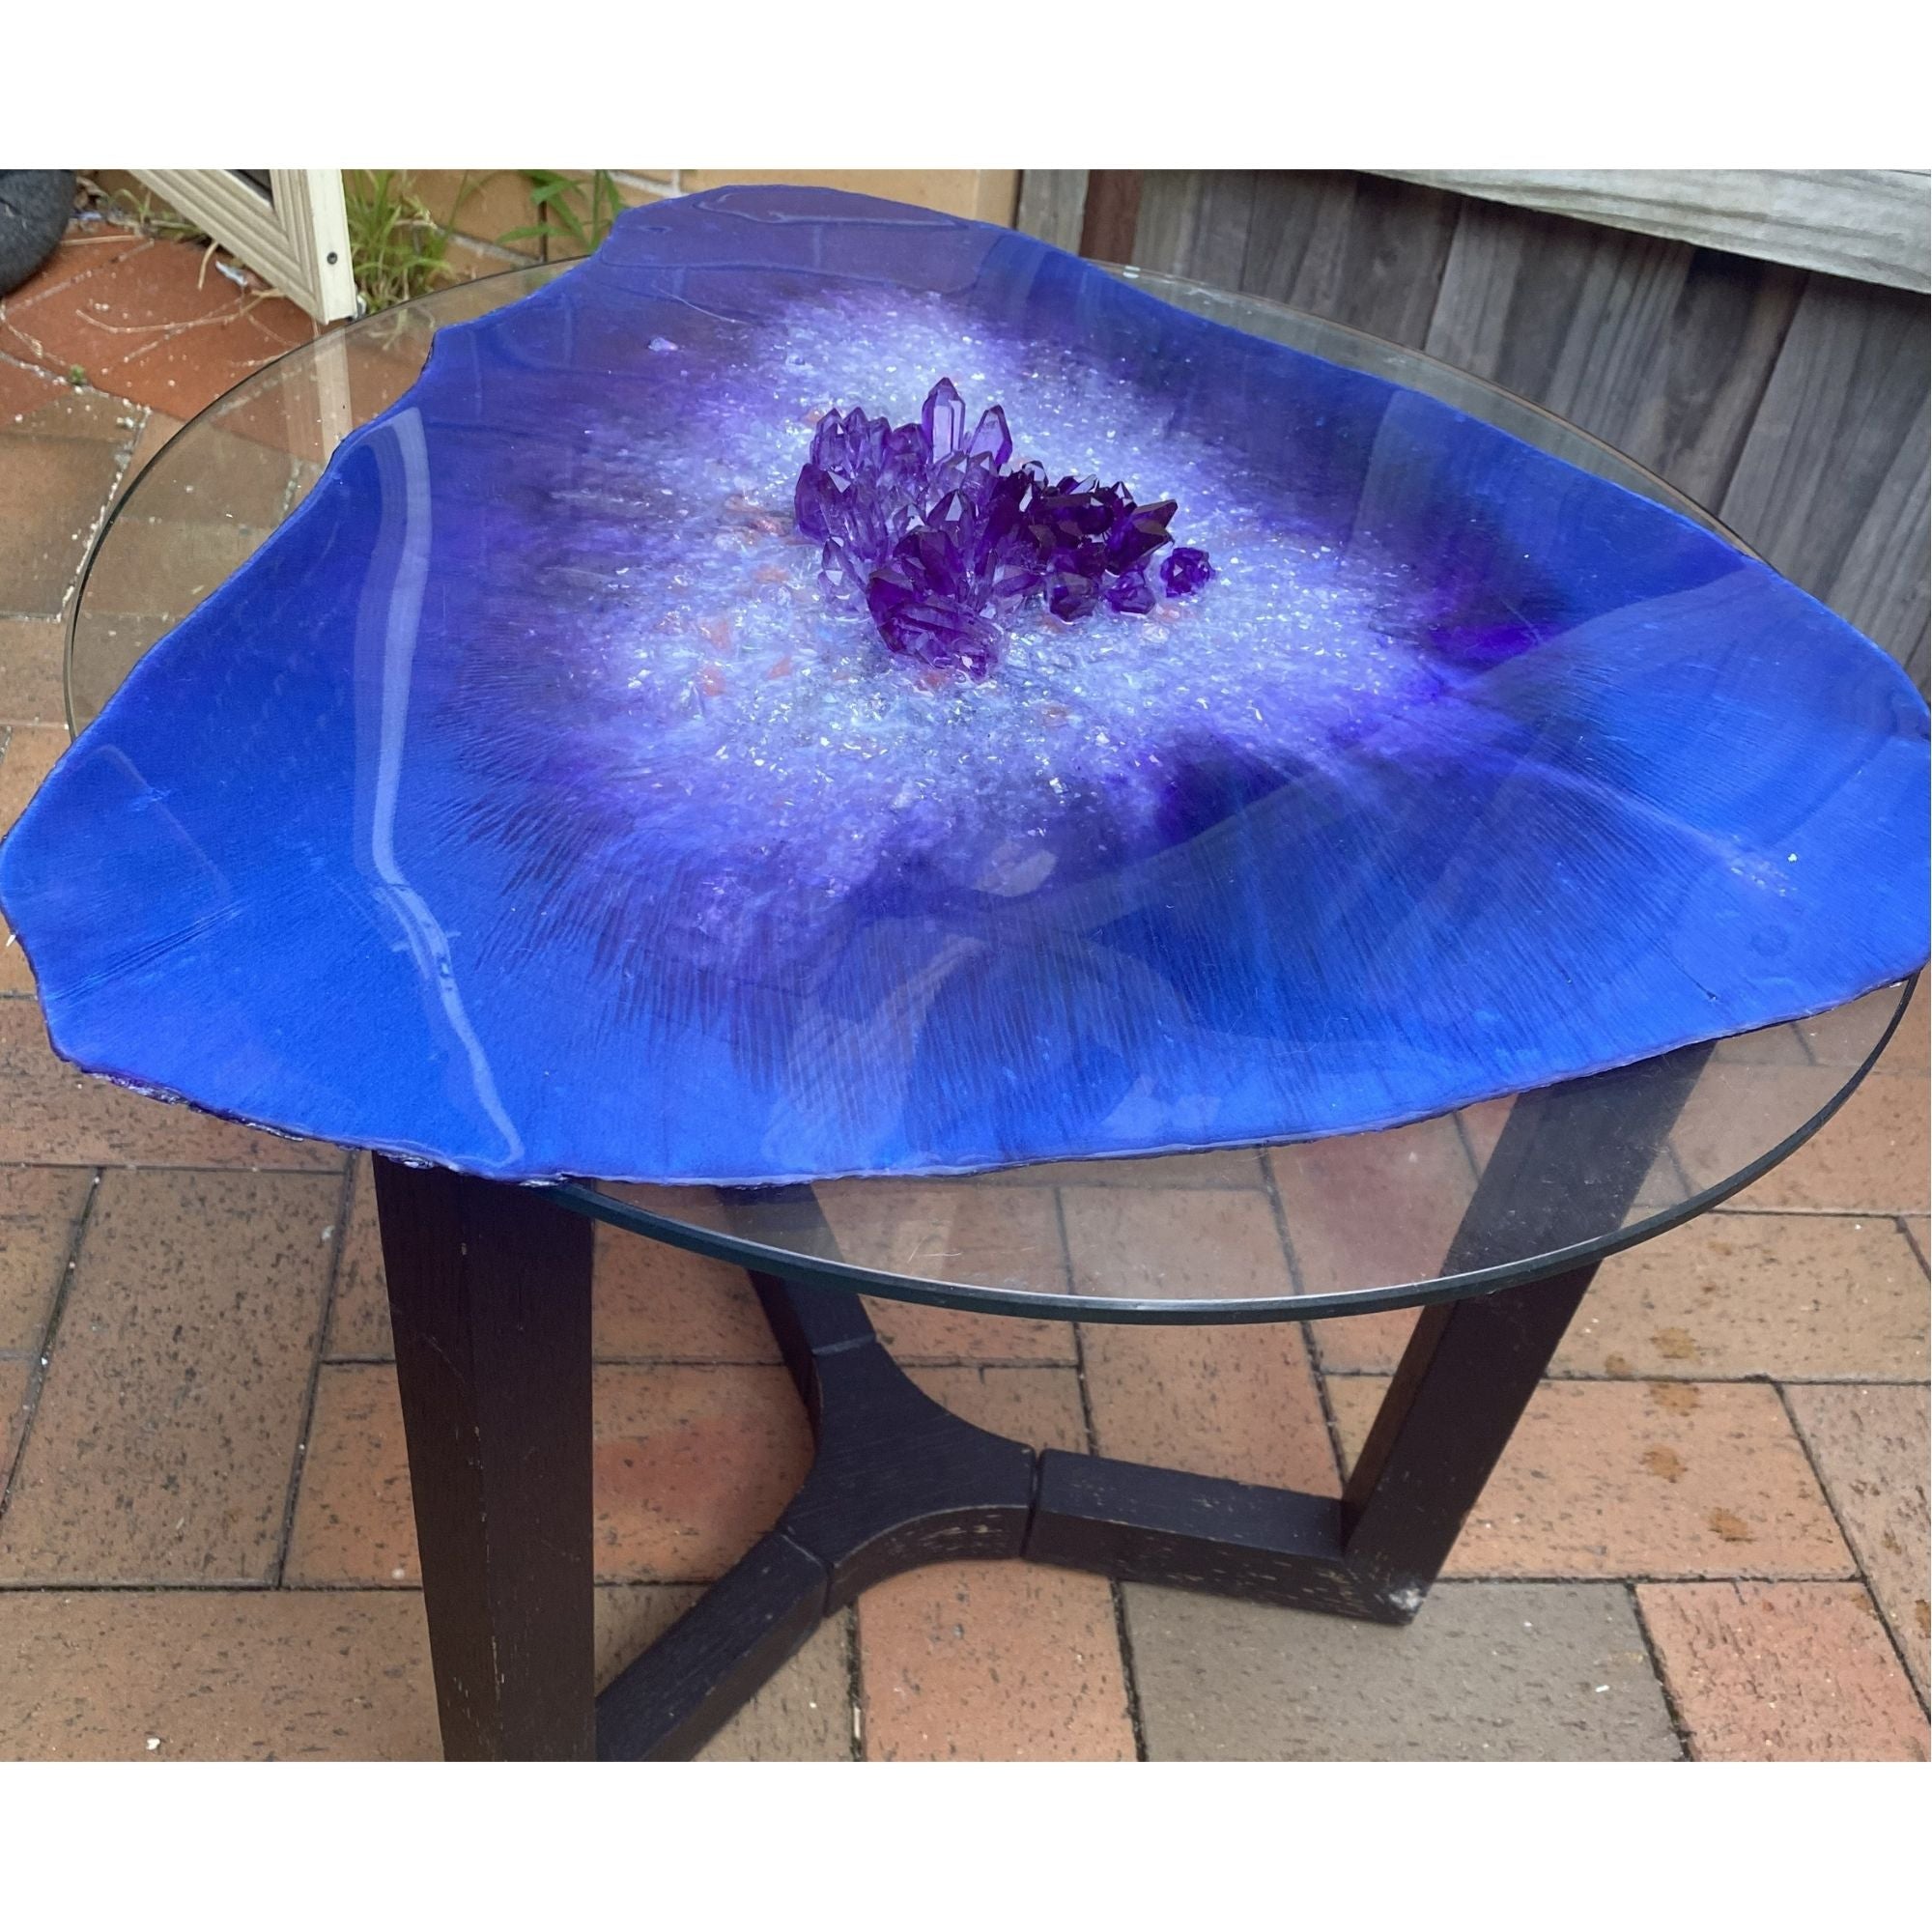 Purple amethyst light coffee table with handmade crystals - COMMISSION